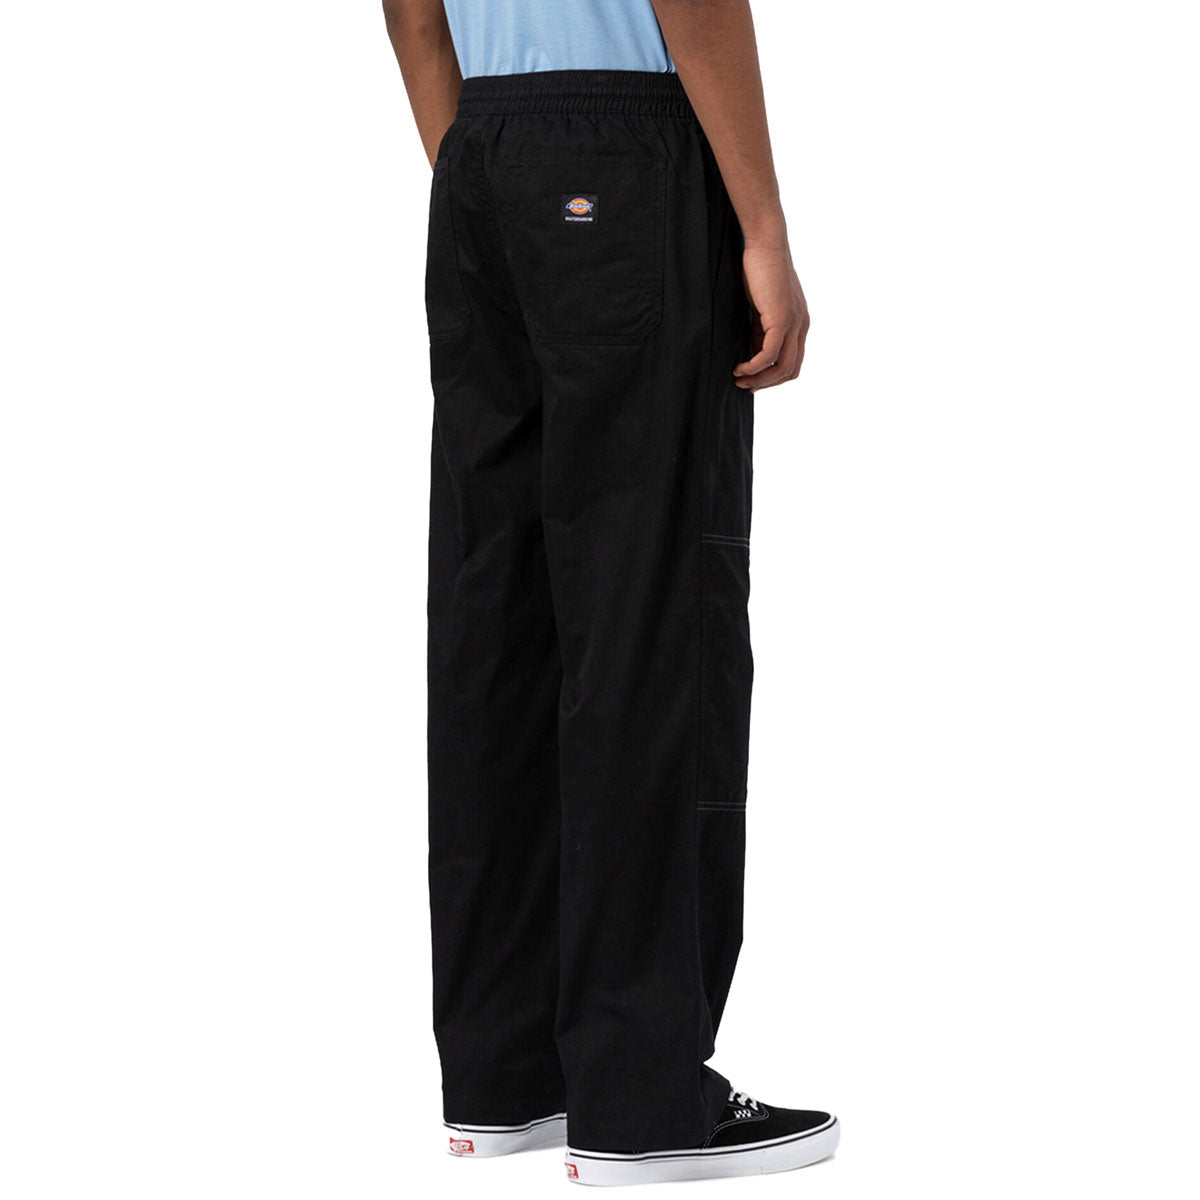 Dickies Summit Relaxed Fit Chef Pants - Black image 2